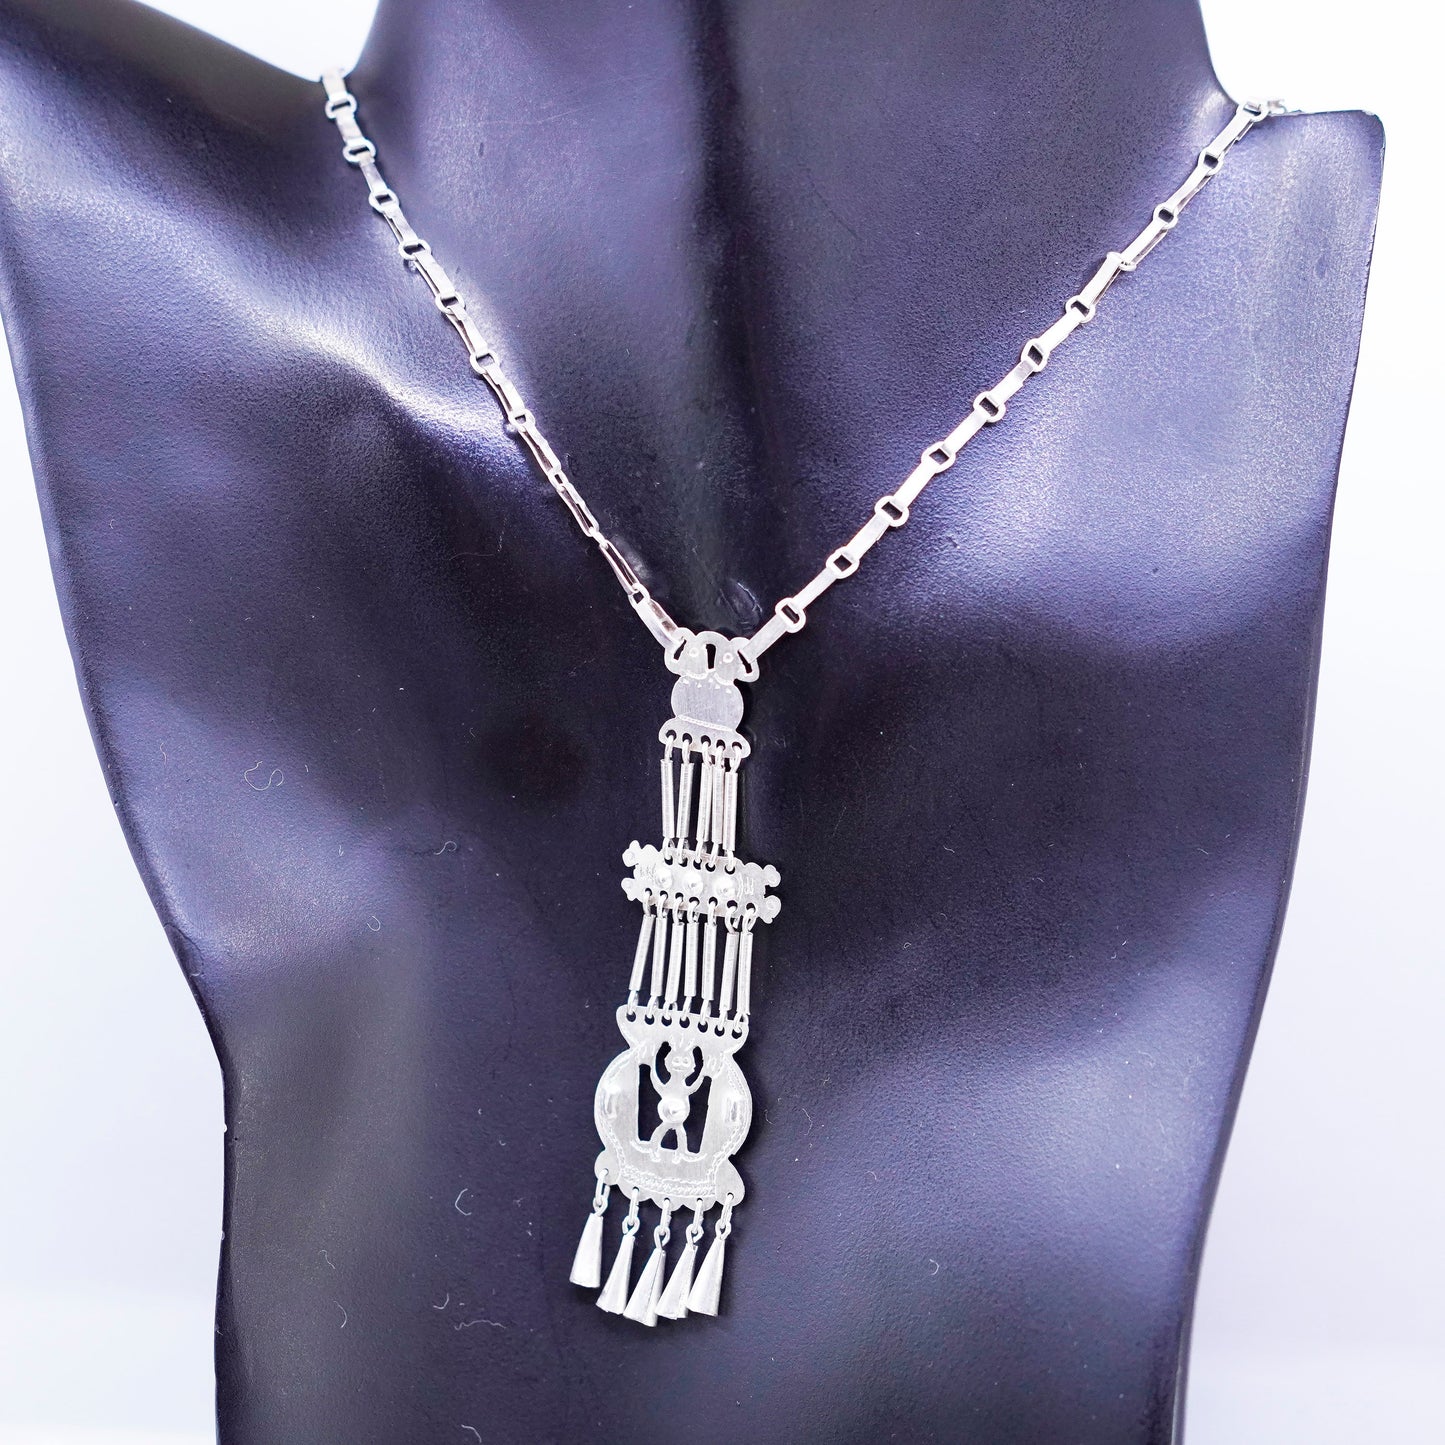 18”, Sterling 950 silver handmade elongated chain necklace with fringe pendant